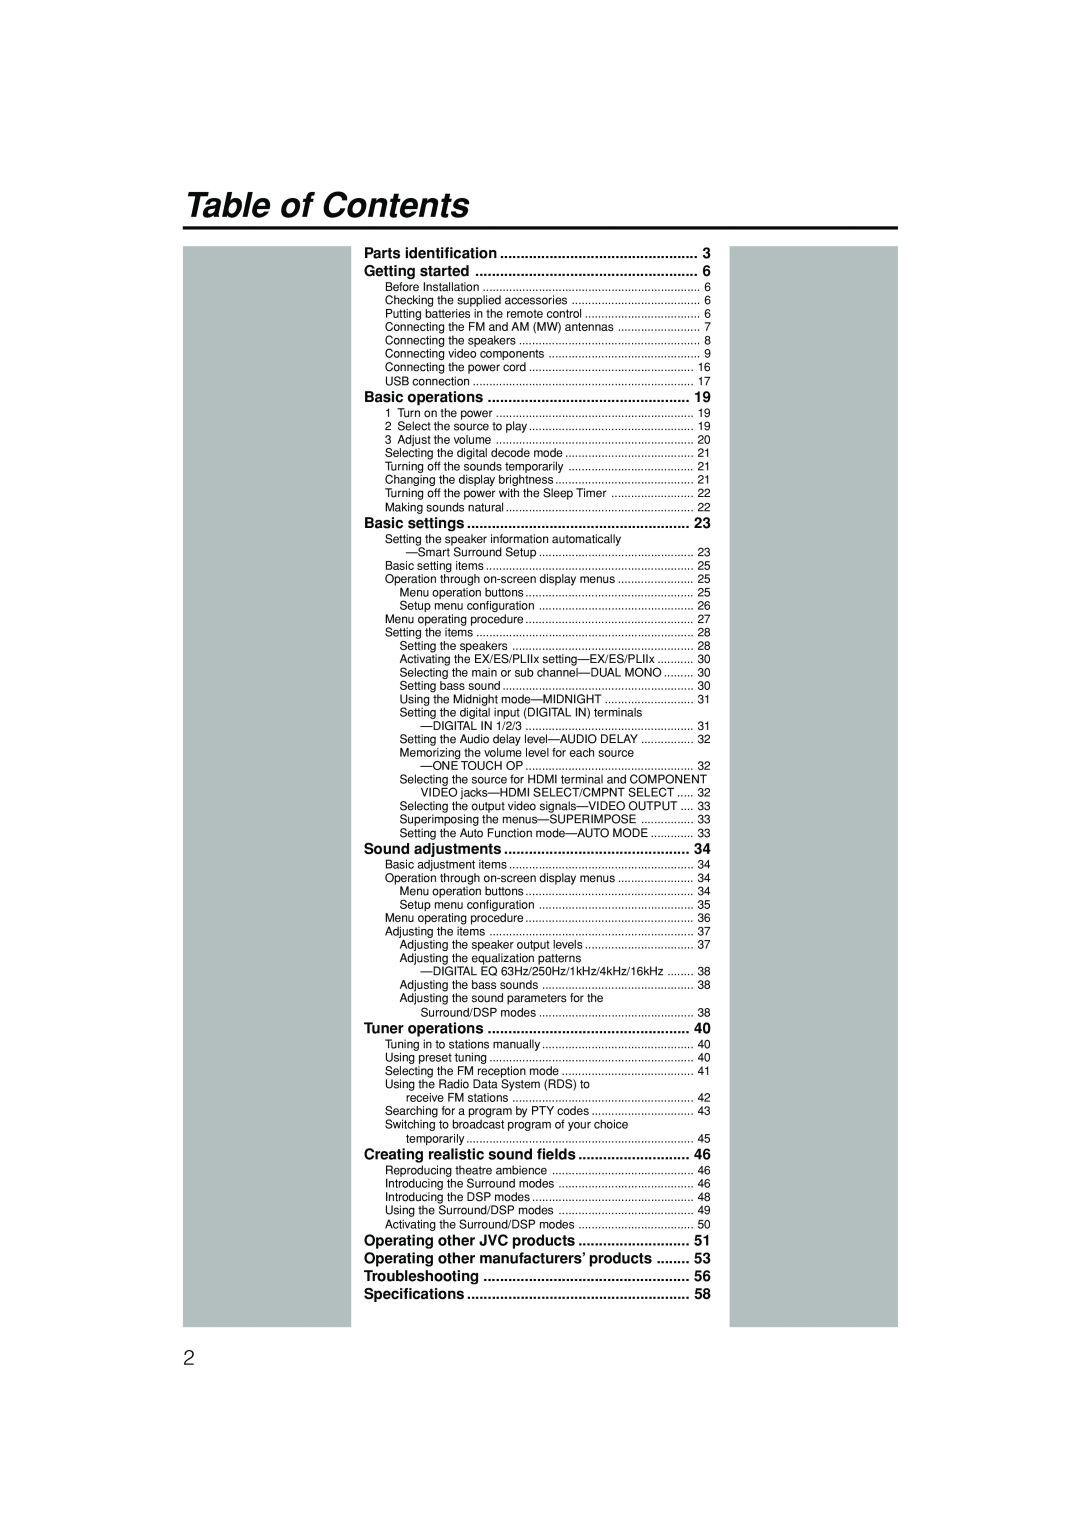 JVC 1105RYMMDWJEIN, LVT1437-001A manual Table of Contents, Operating other manufacturers’ products 